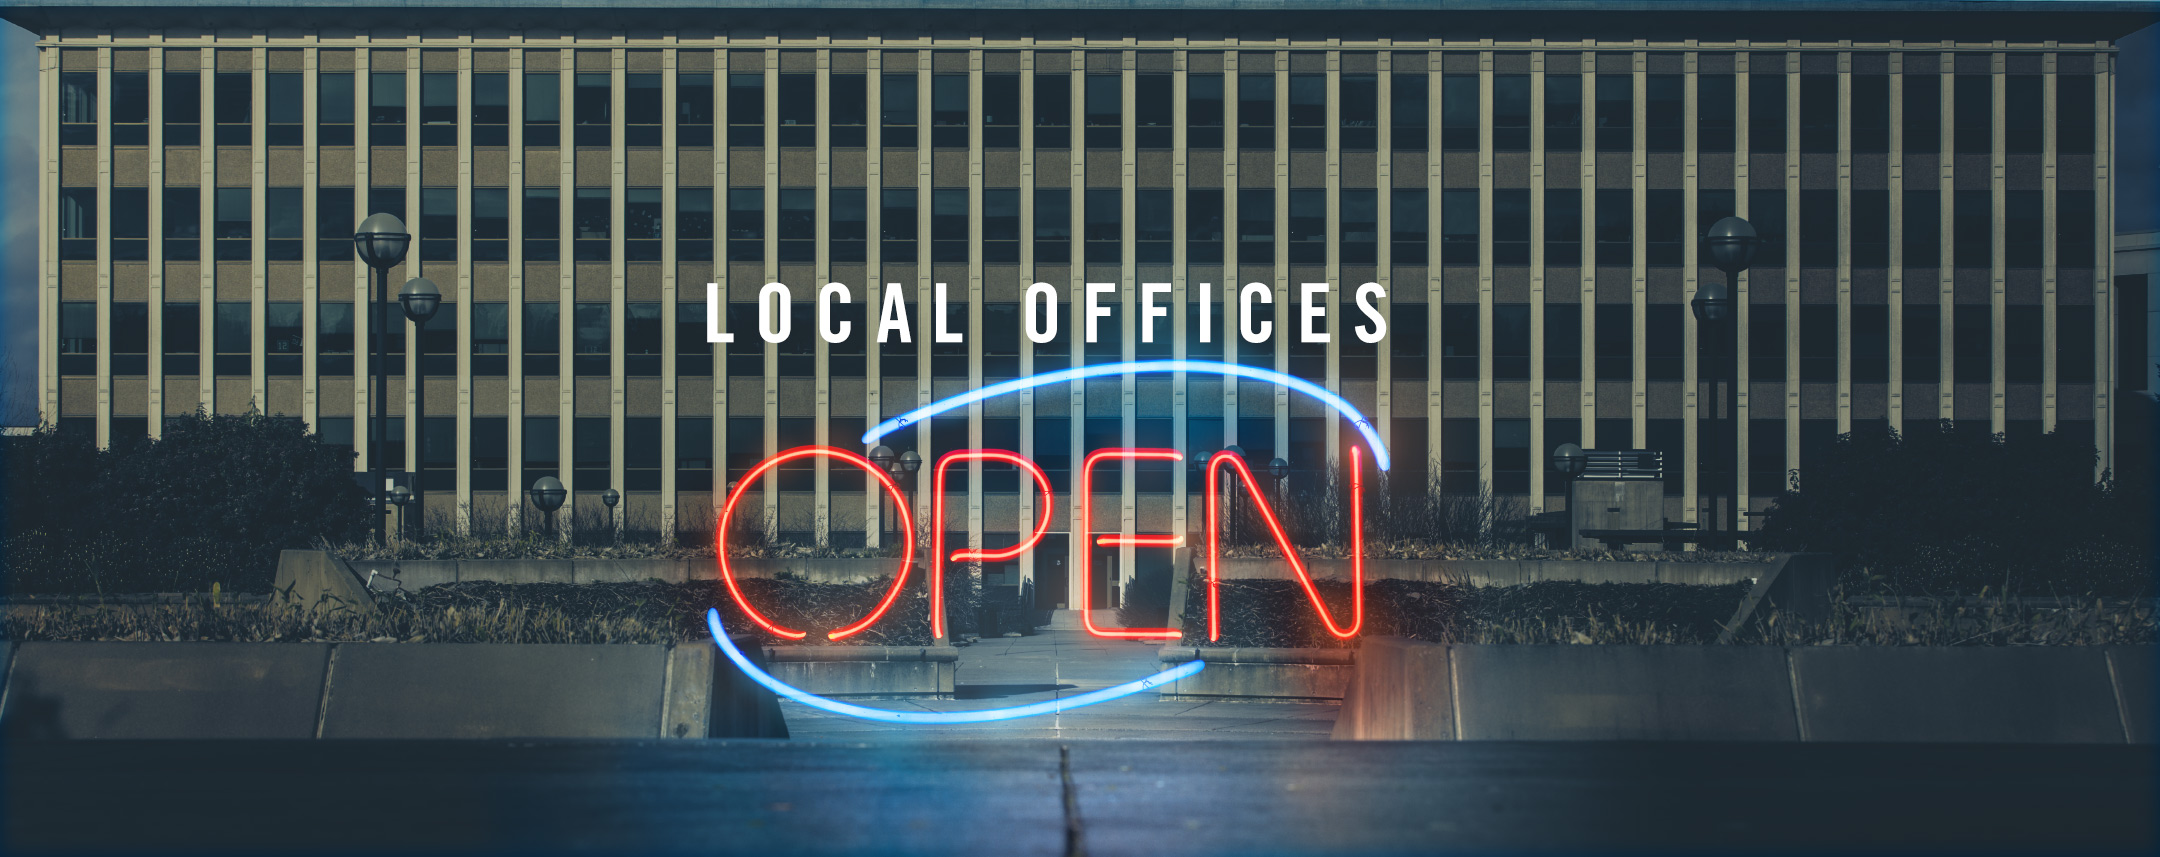 Local-offices-FEATURED.jpg